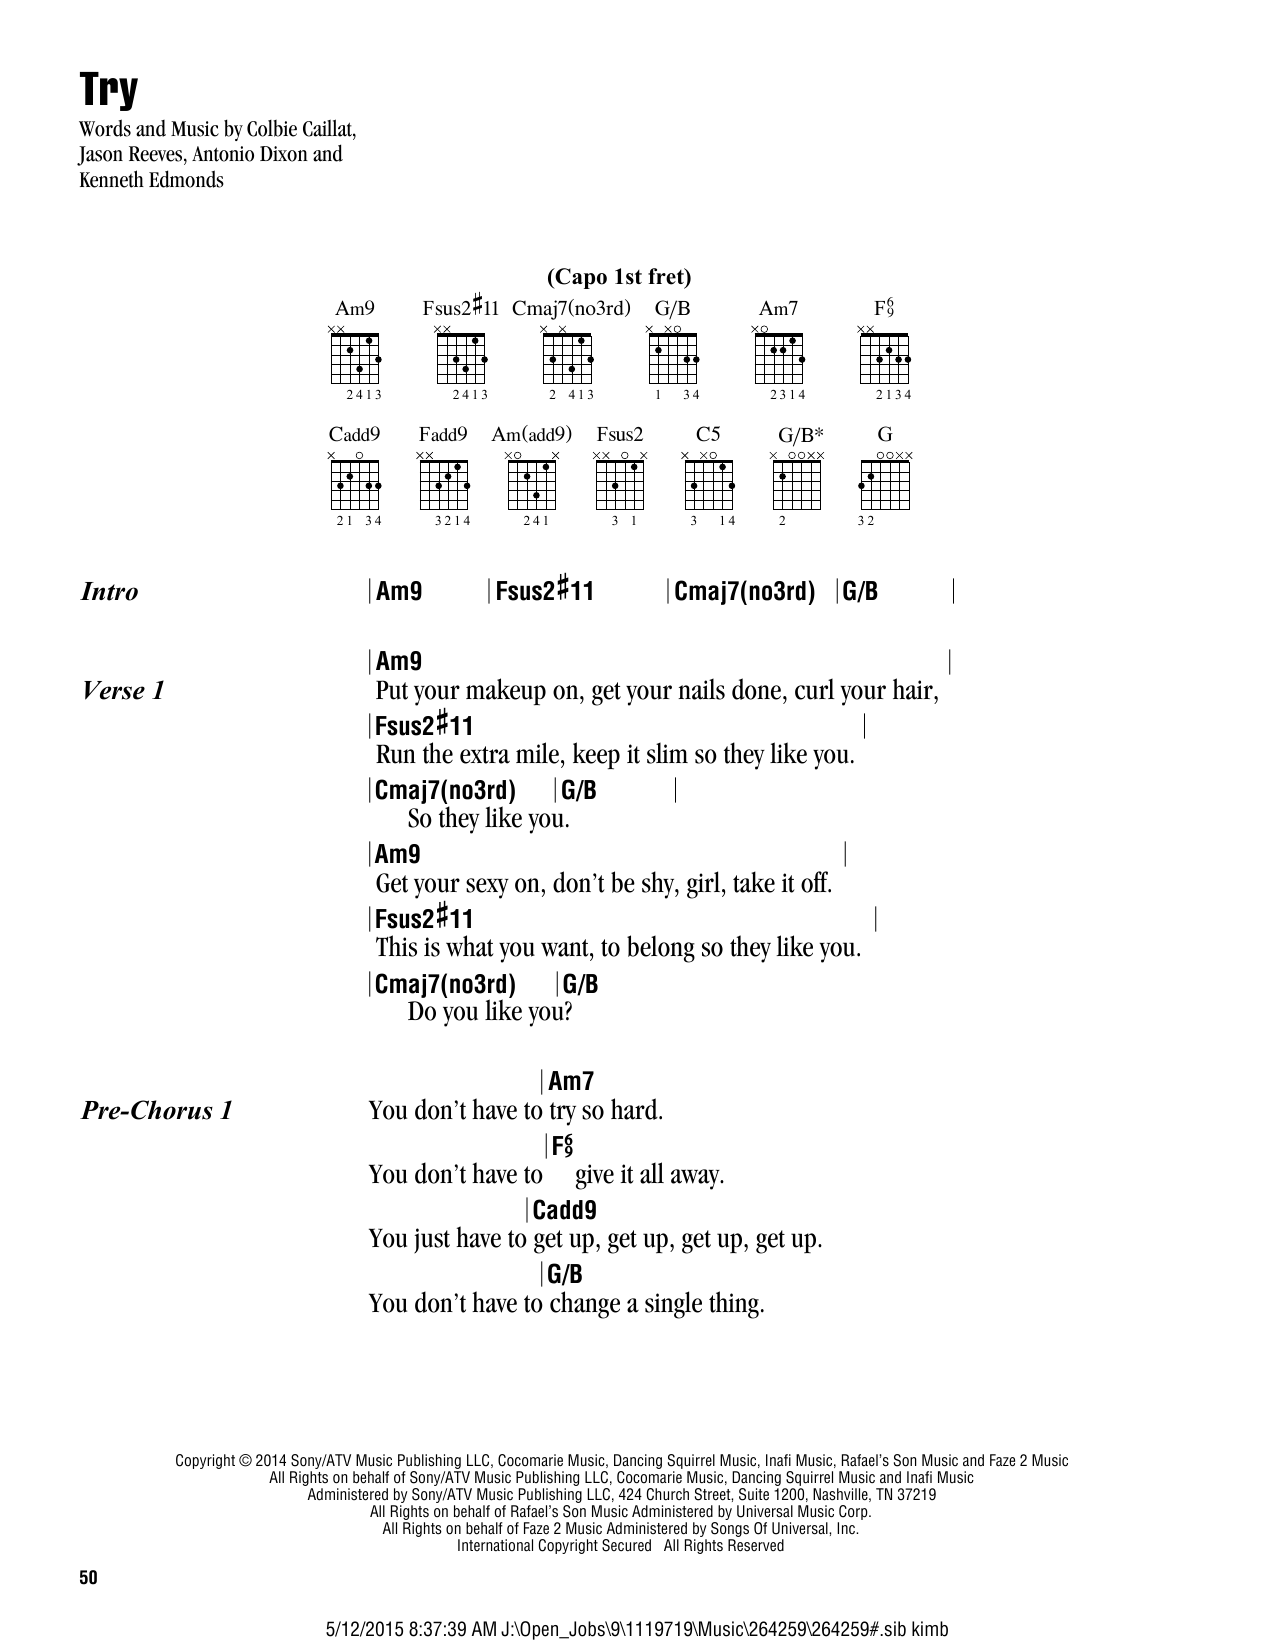 Download Colbie Caillat Try Sheet Music